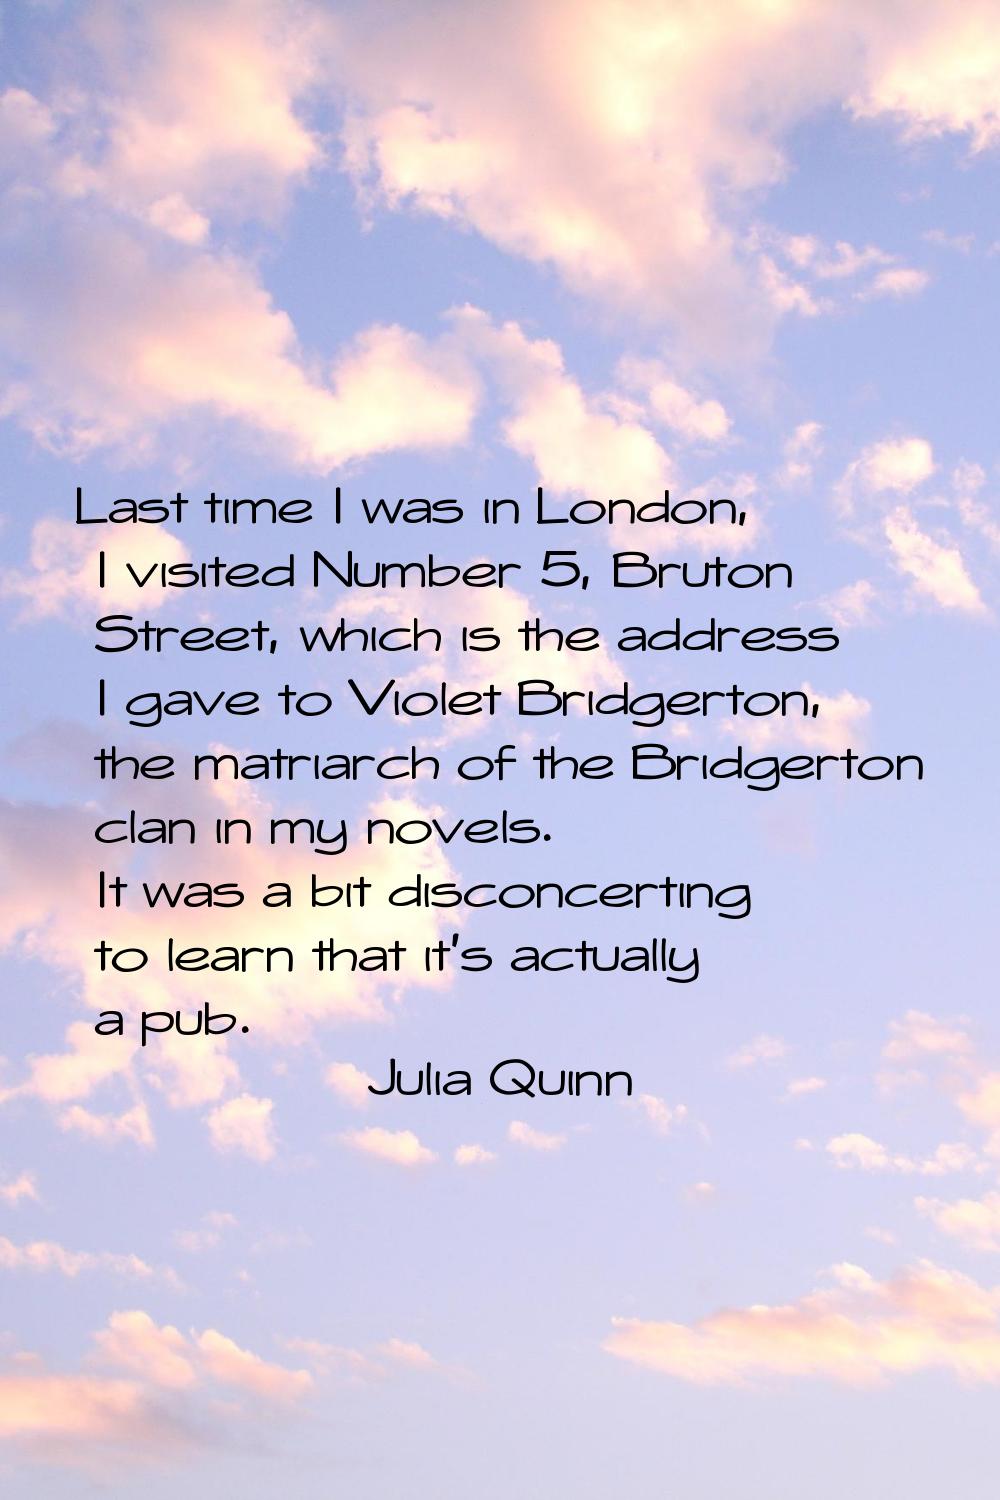 Last time I was in London, I visited Number 5, Bruton Street, which is the address I gave to Violet